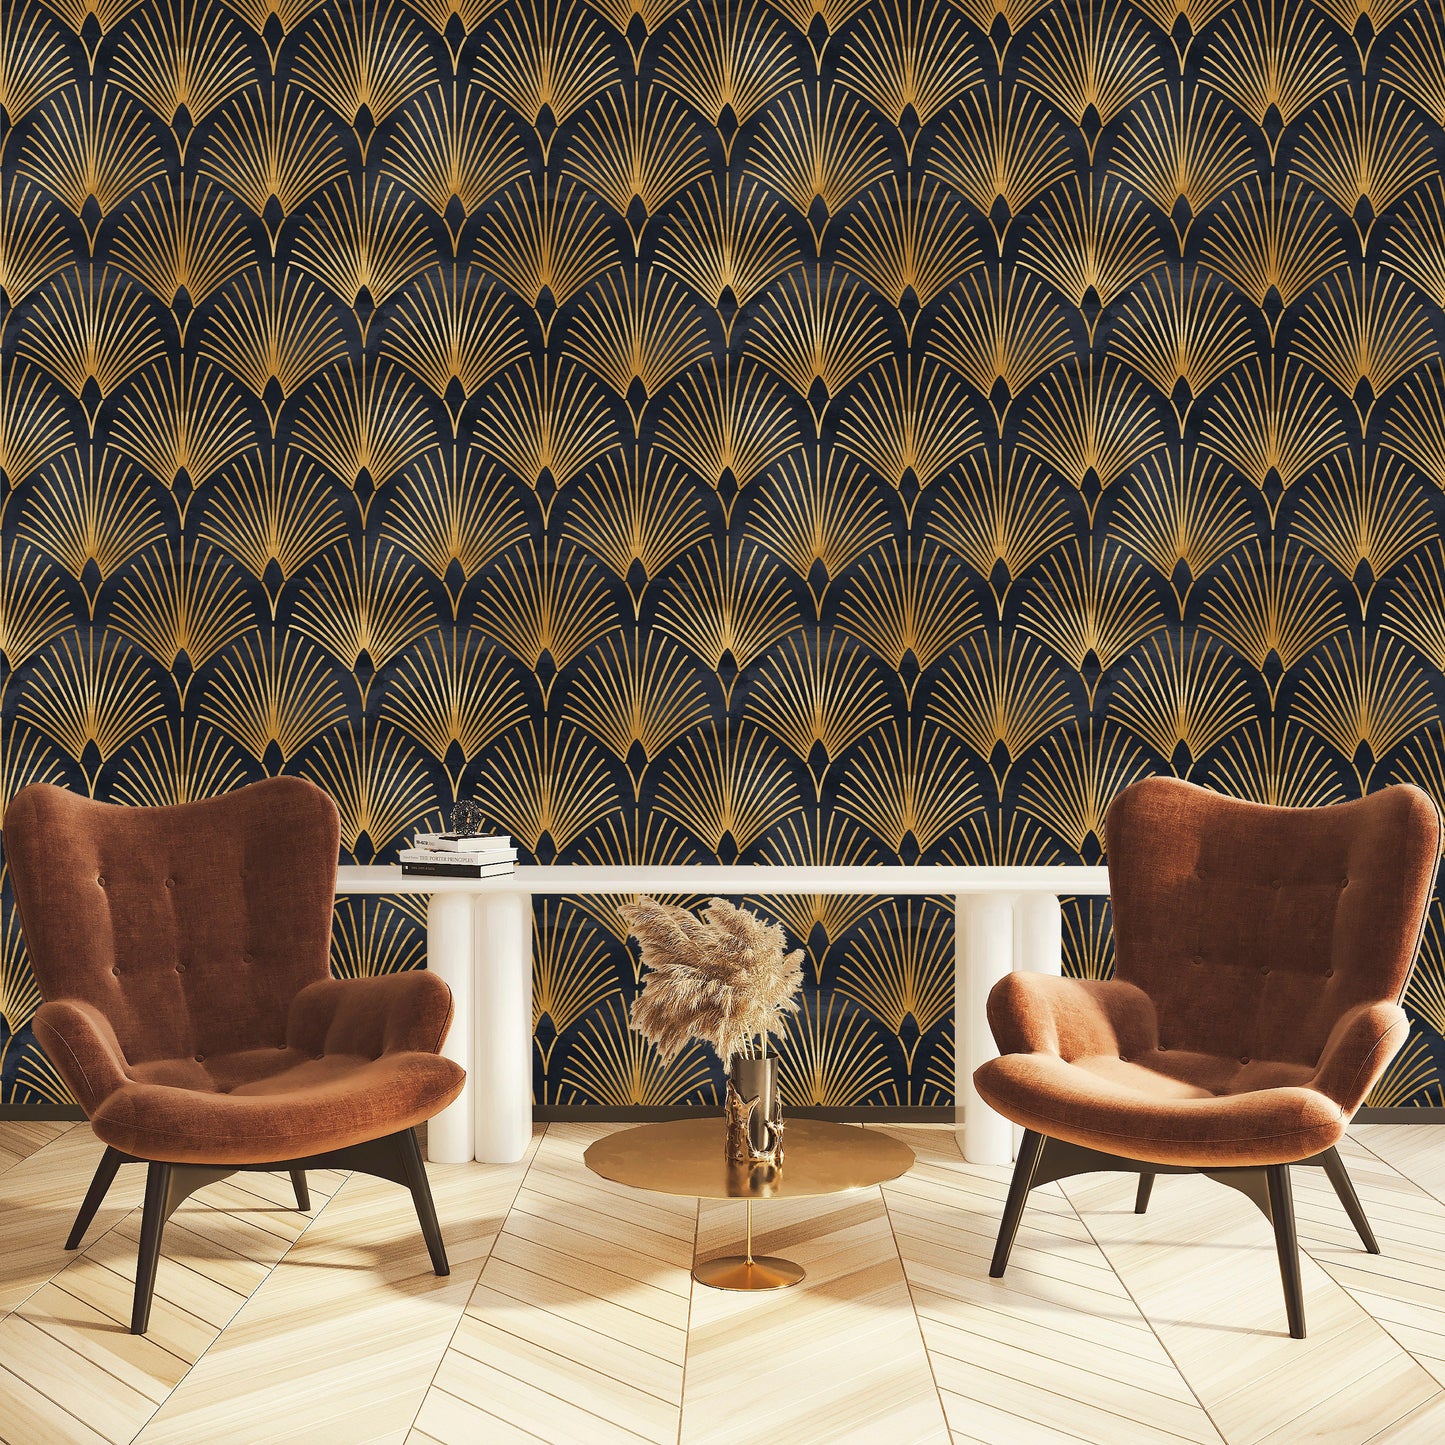 Arches Wallpaper Peel and Stick, Black Gold Wallpaper, Art Deco Wallpaper, Removable Wall Paper